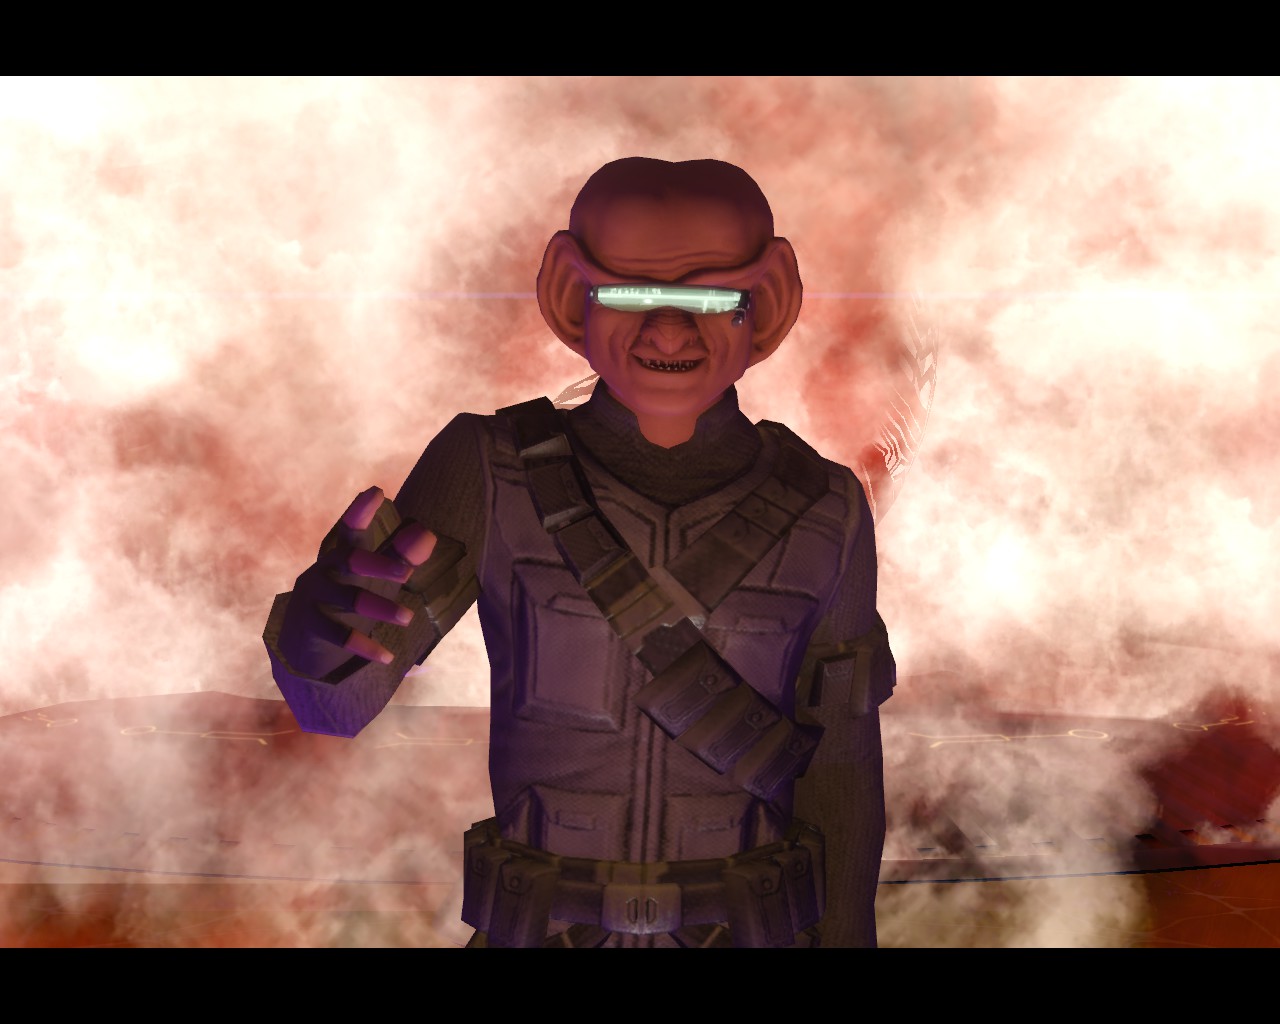 cool_ferengi_never_look_at_explosions_by_bloodrave1984-dcejepe.jpg